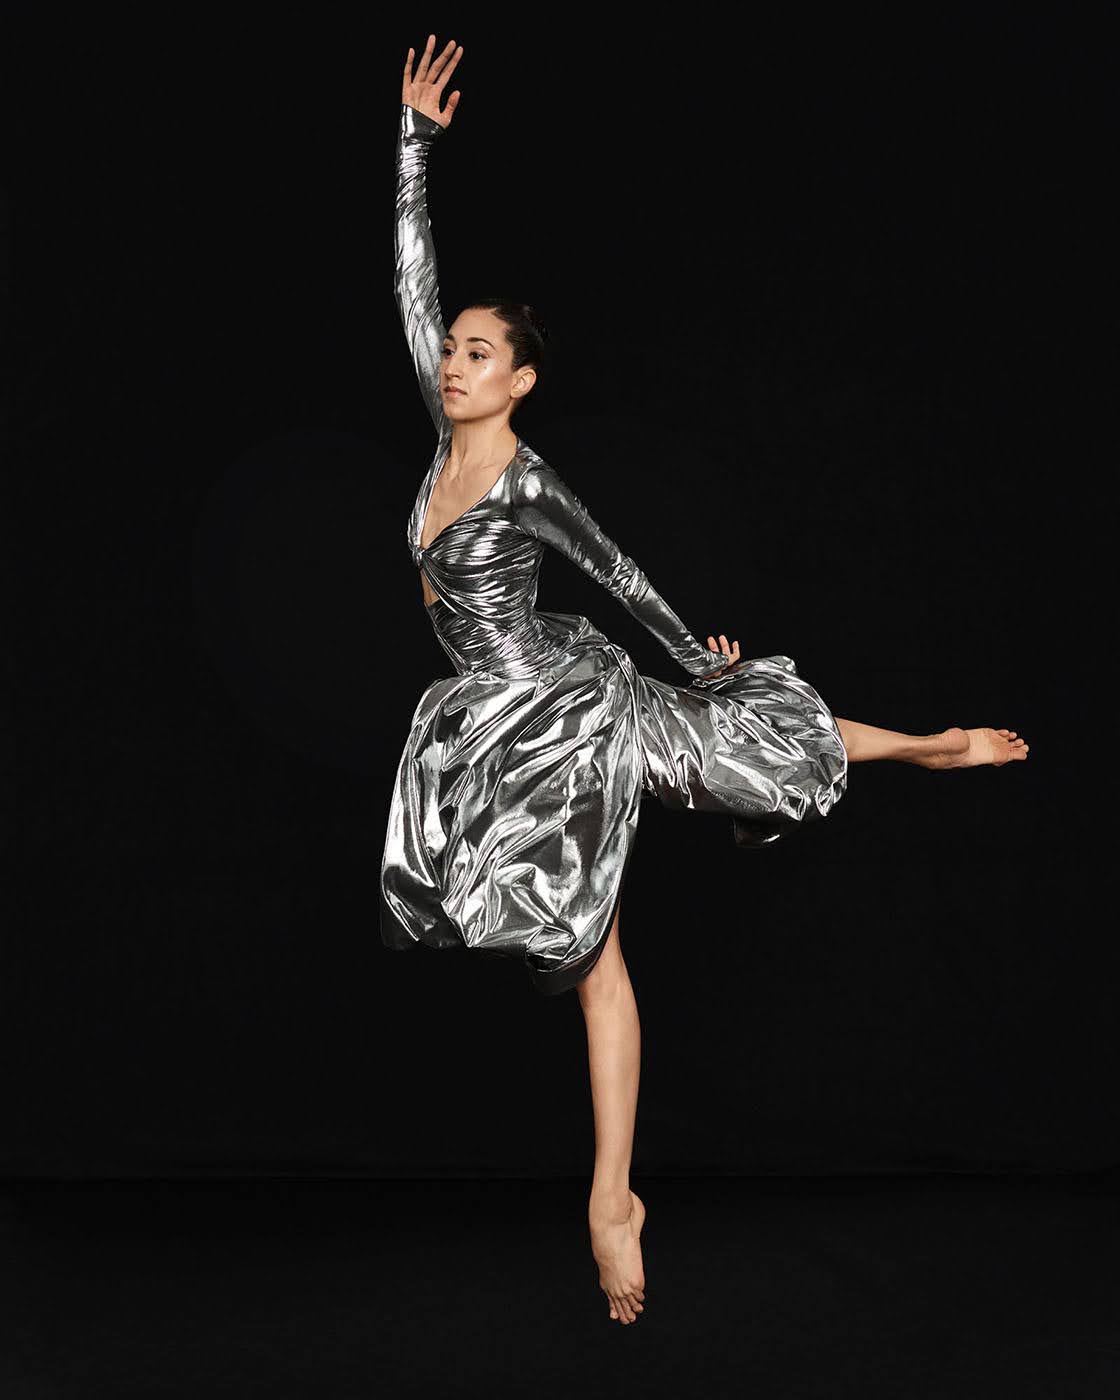 Larissa Asebedo dressed in a gorgeous silver costume with a fitted torso and ballon legs, jumps into the air in a 90 degree arabesque.